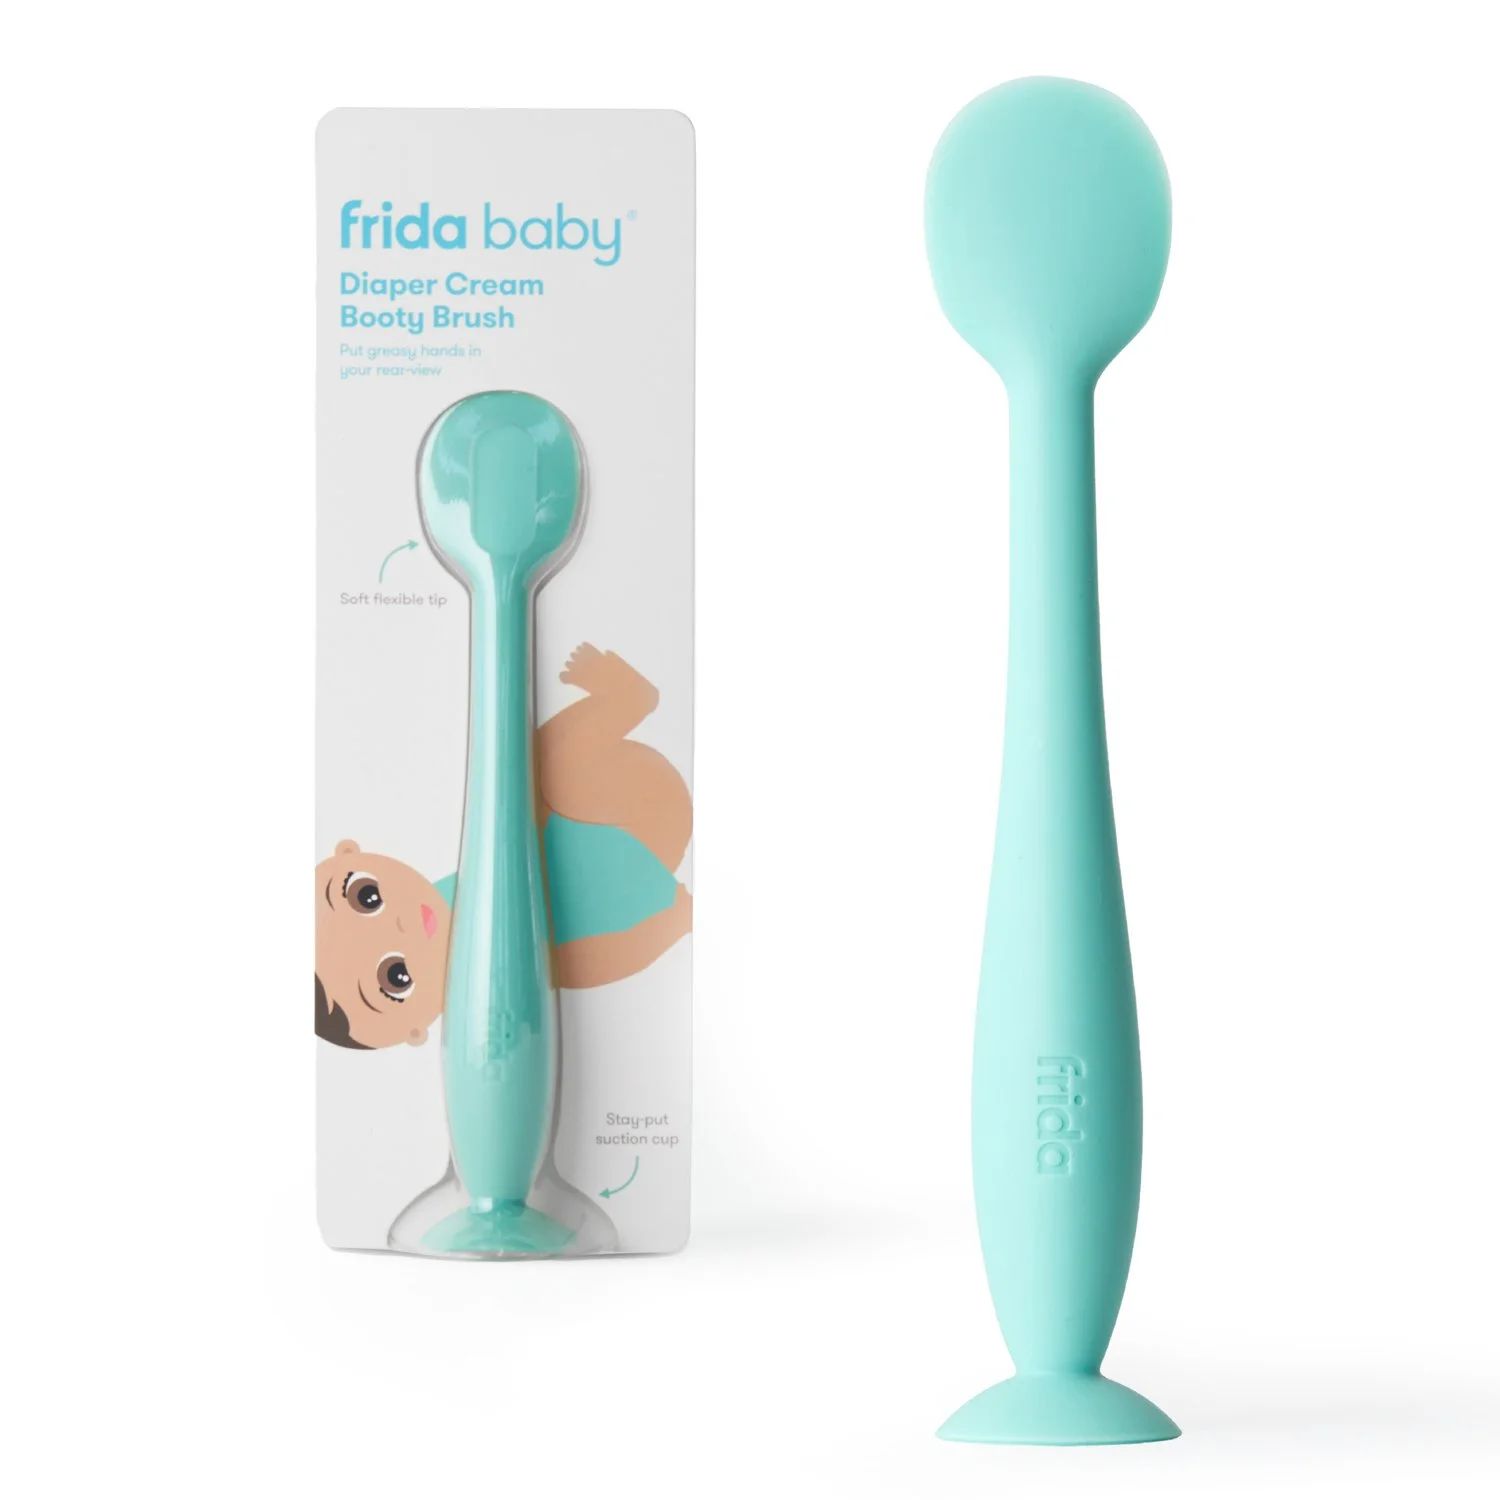 Frida Baby Silicone Booty Brush Applicator for Infant Diaper Rash Cream and Butt Paste, Blue | Walmart (US)